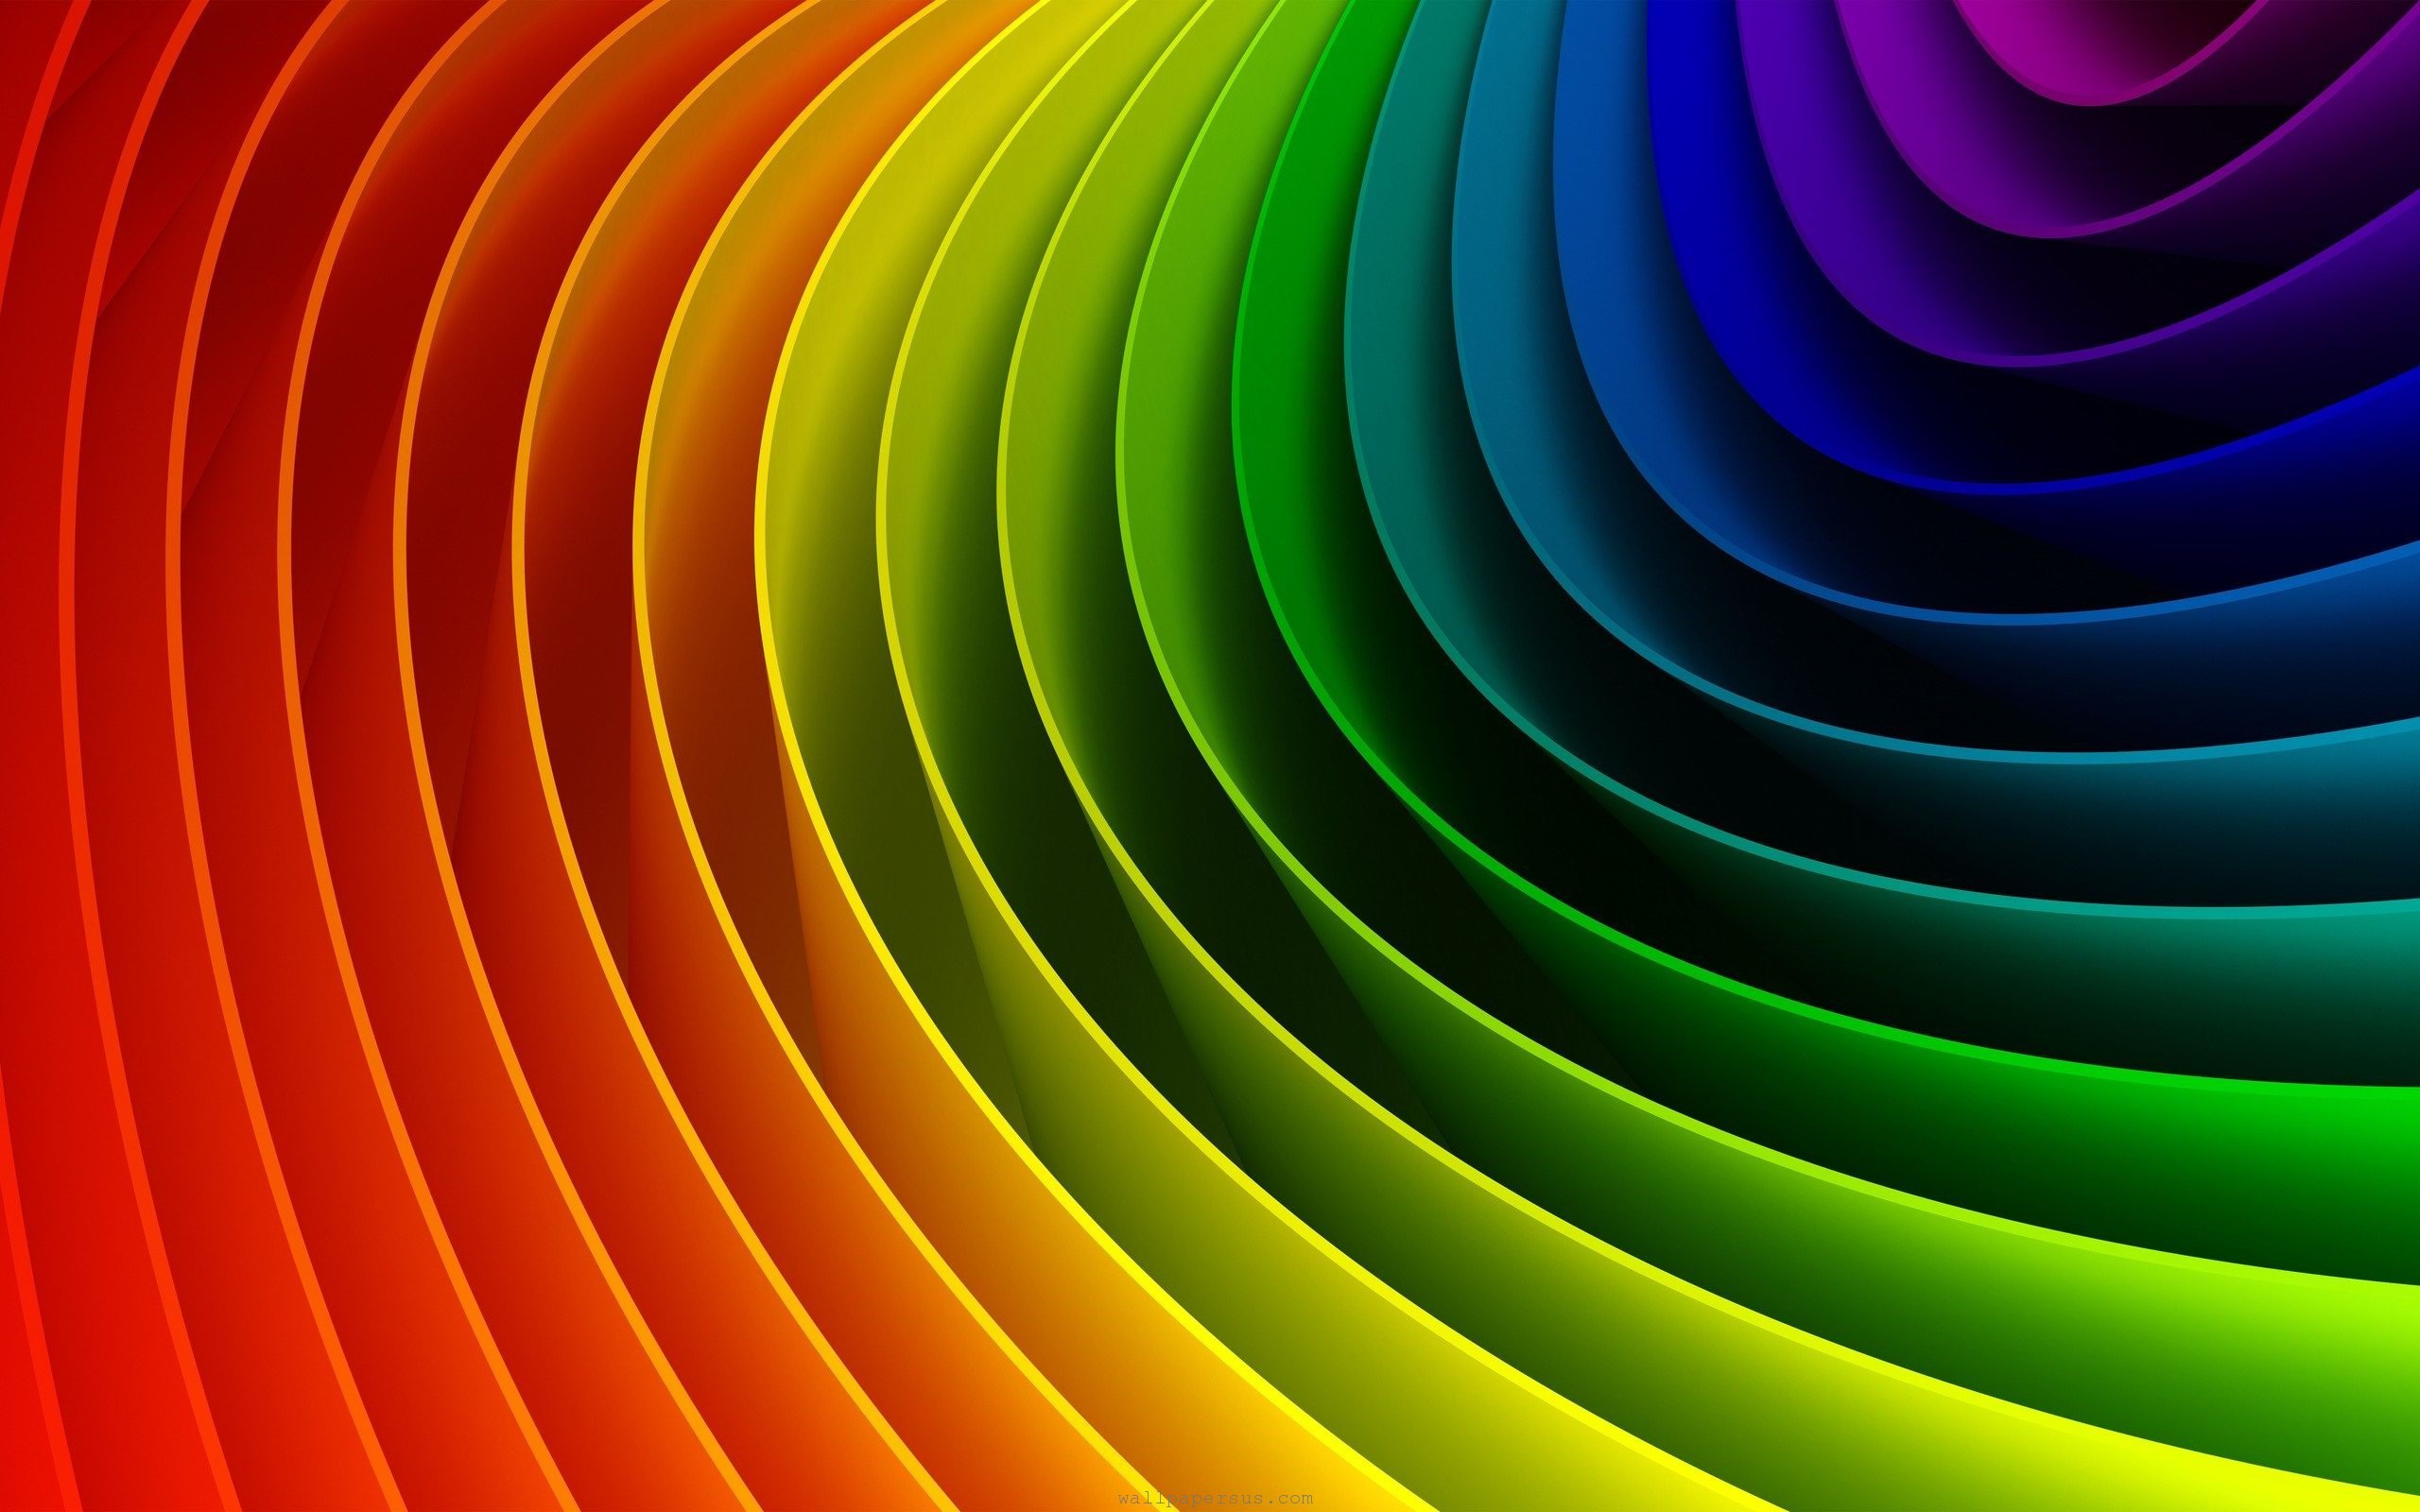 3D Abstract Colorful Background download wallpapers